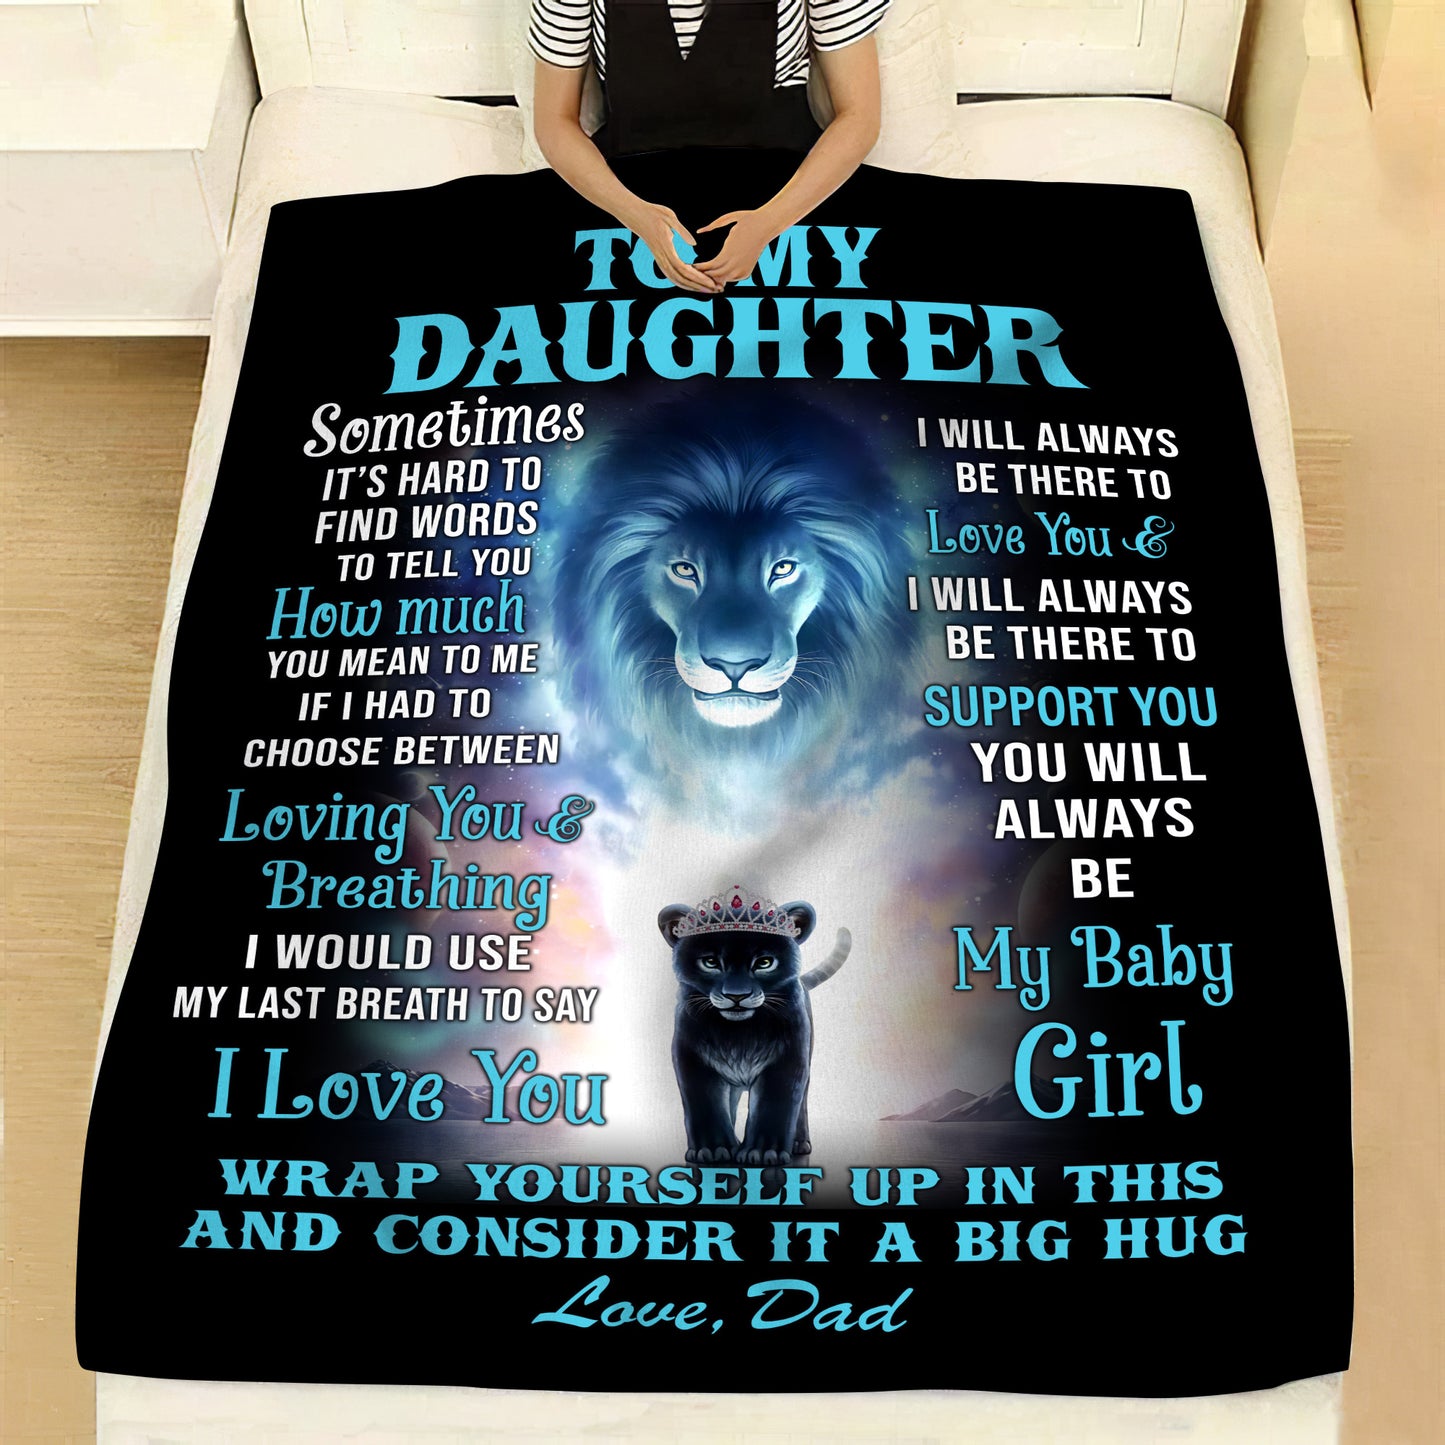 To My Daughter | Sometimes It's Hard To Find Words | Love Dad | Cozy Plush Fleece Blanket